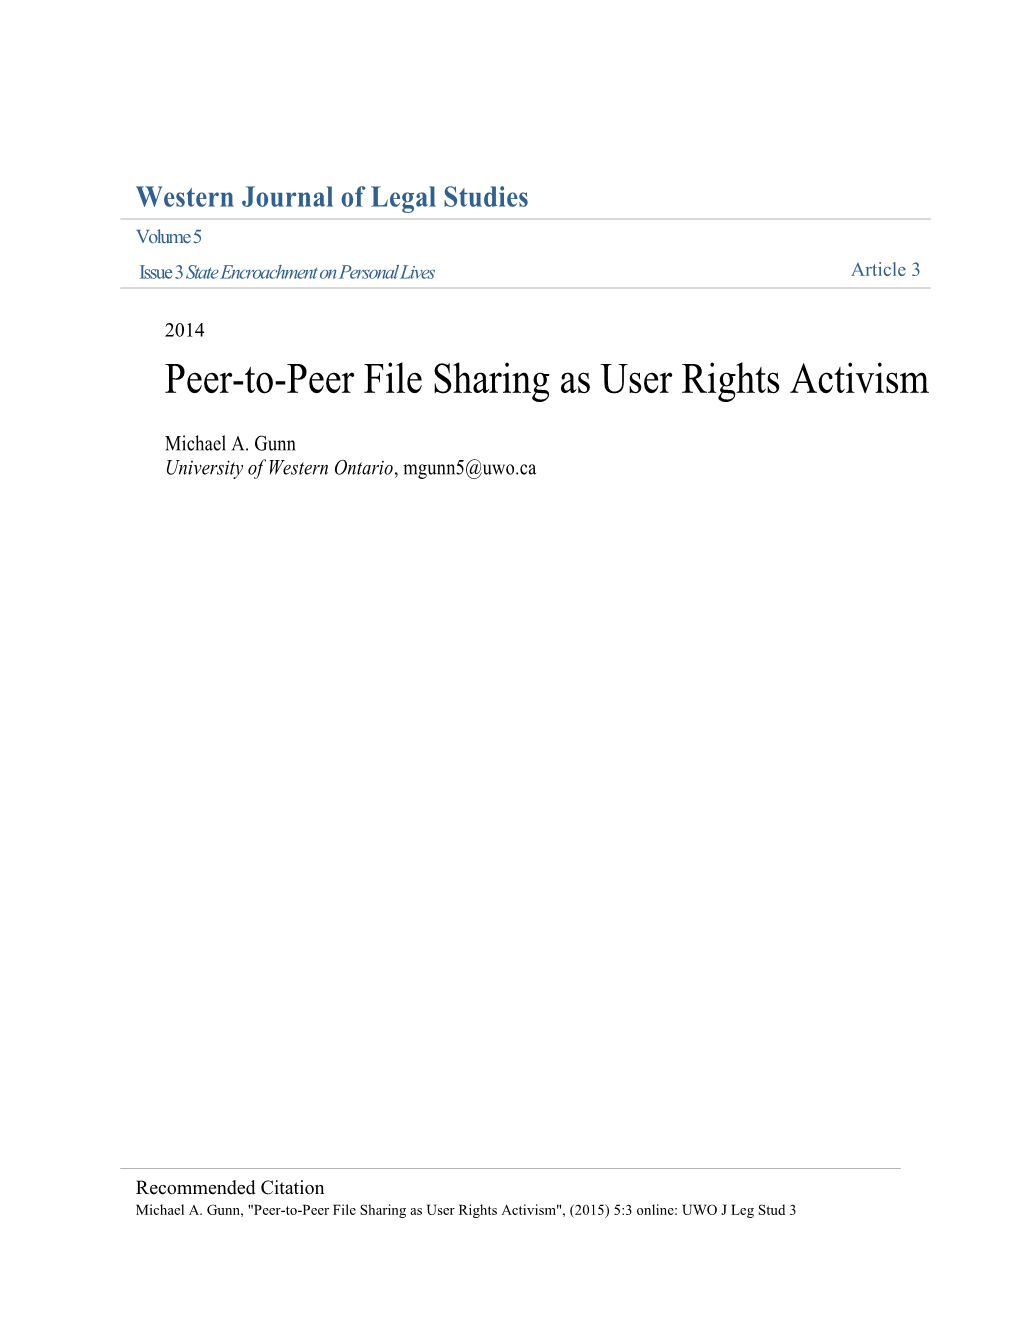 Peer-To-Peer File Sharing As User Rights Activism